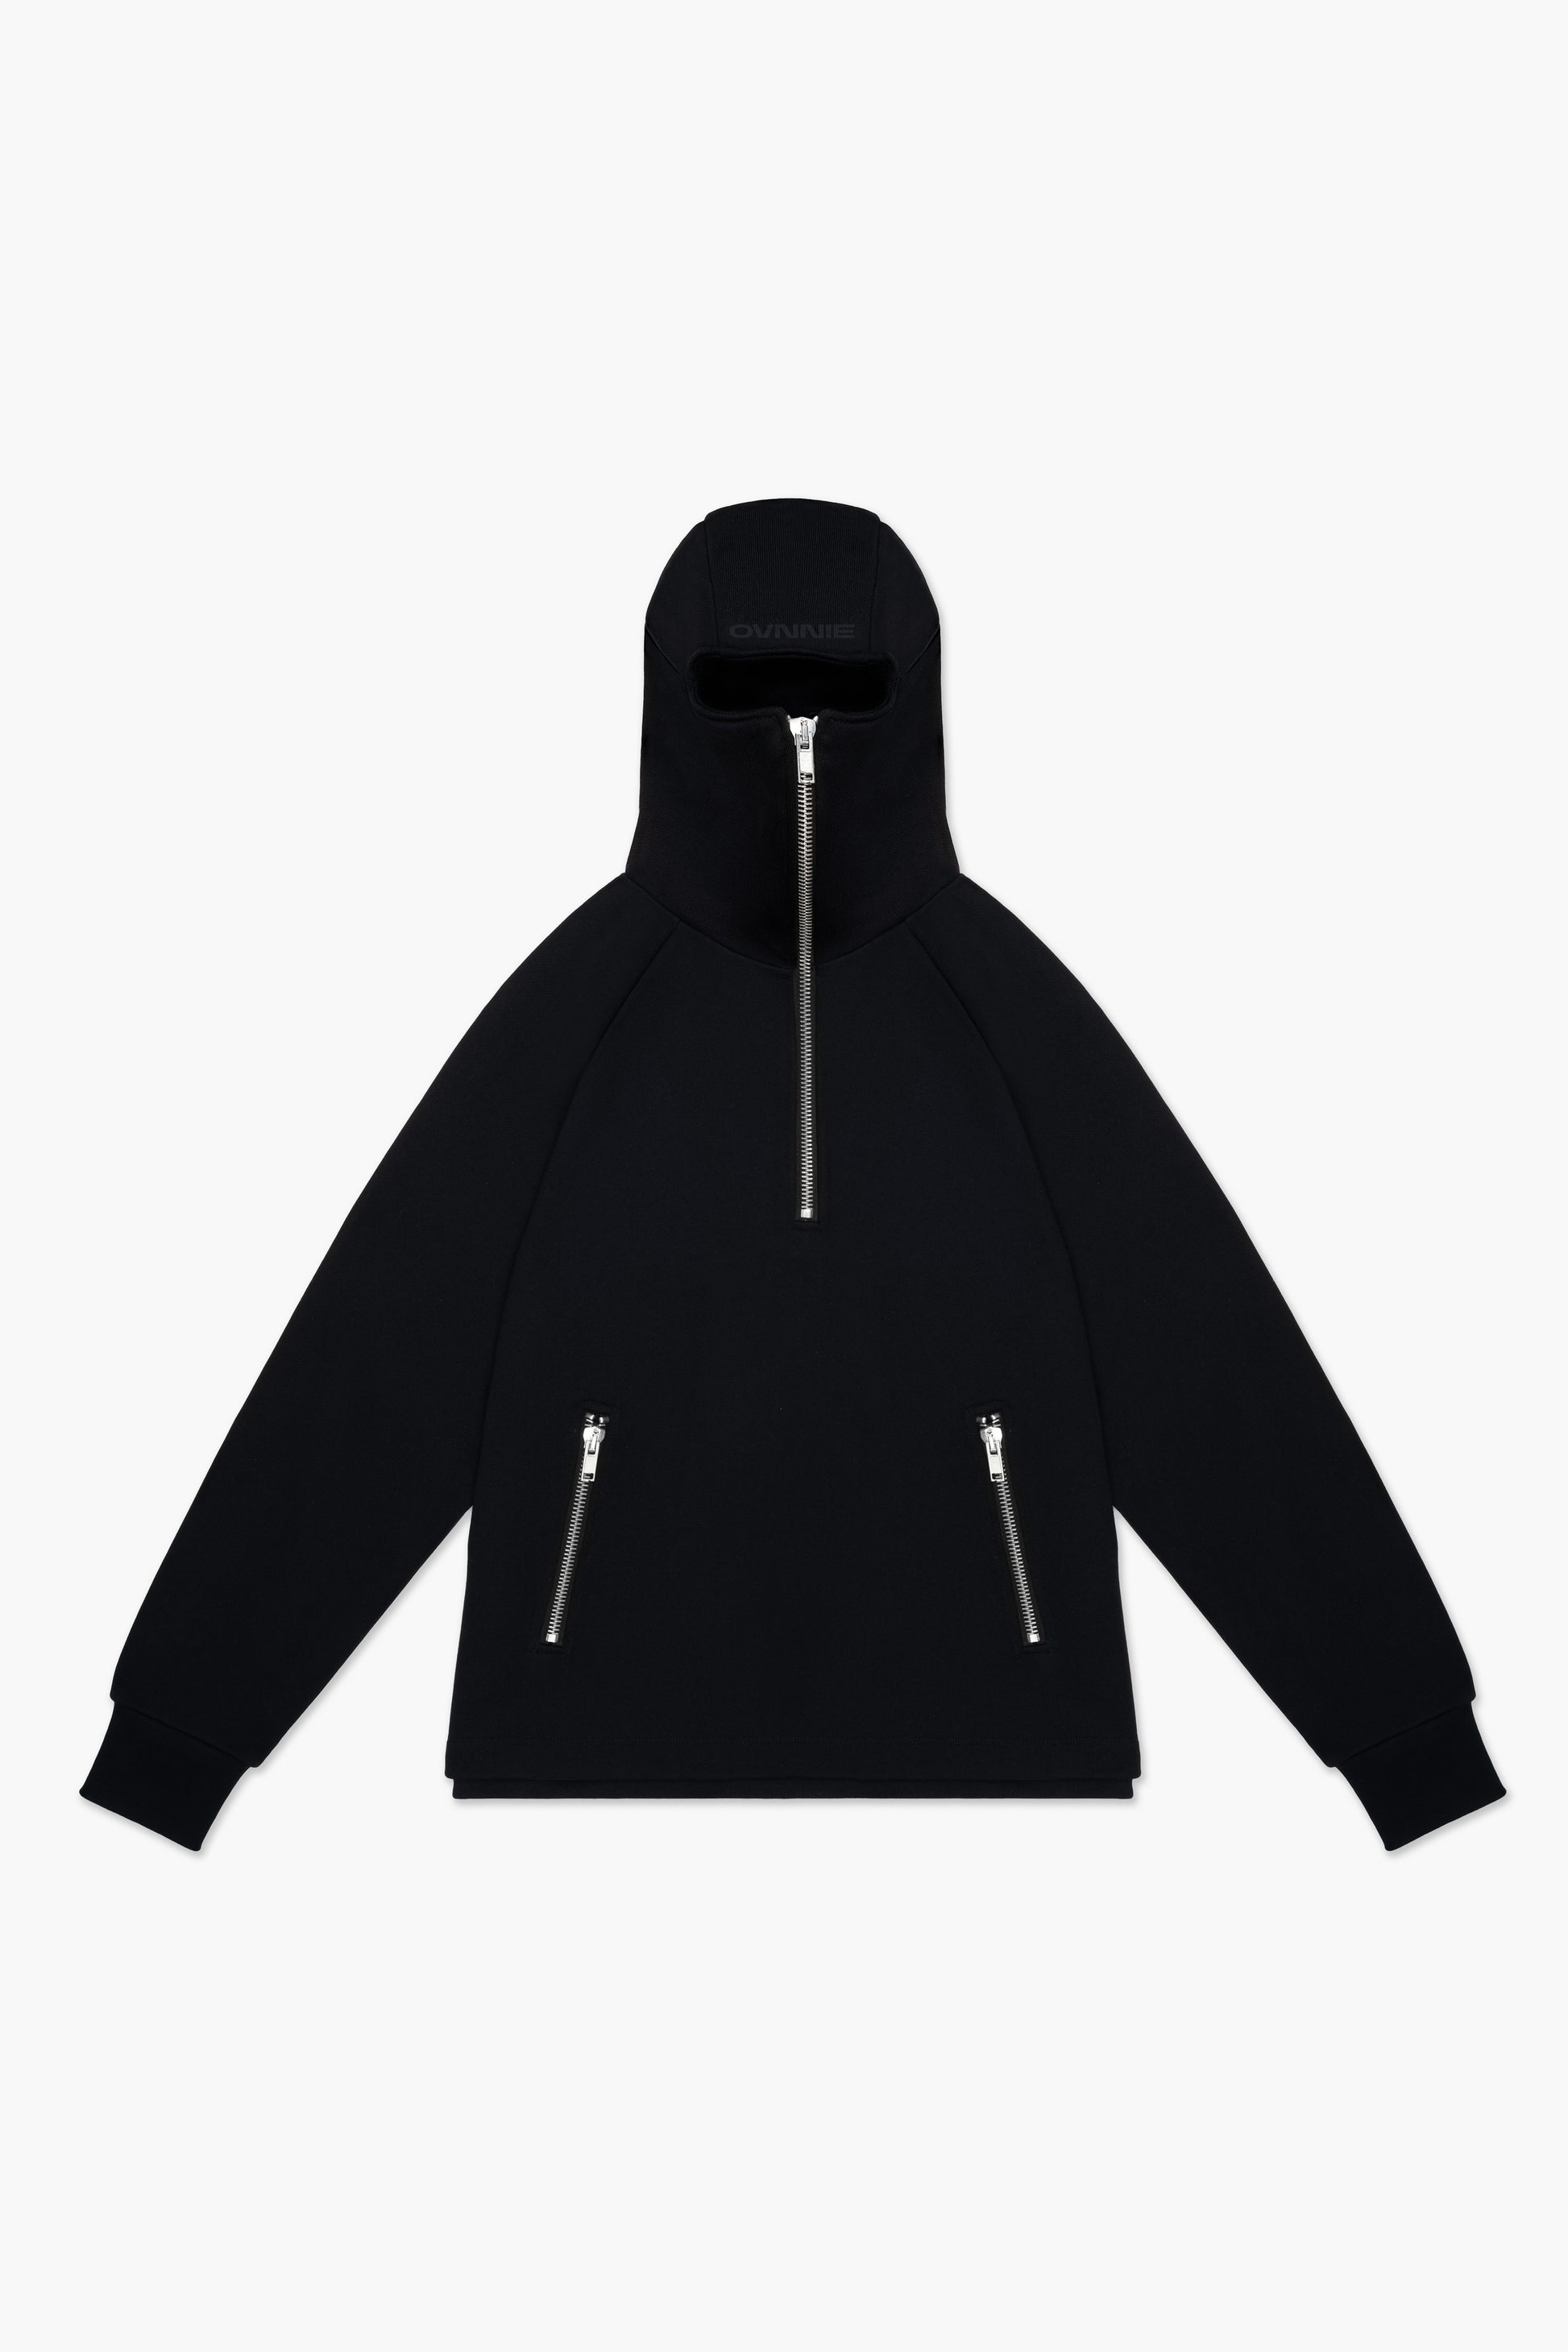 Front of black balaclava hoodie zipped all the way up ovnnie